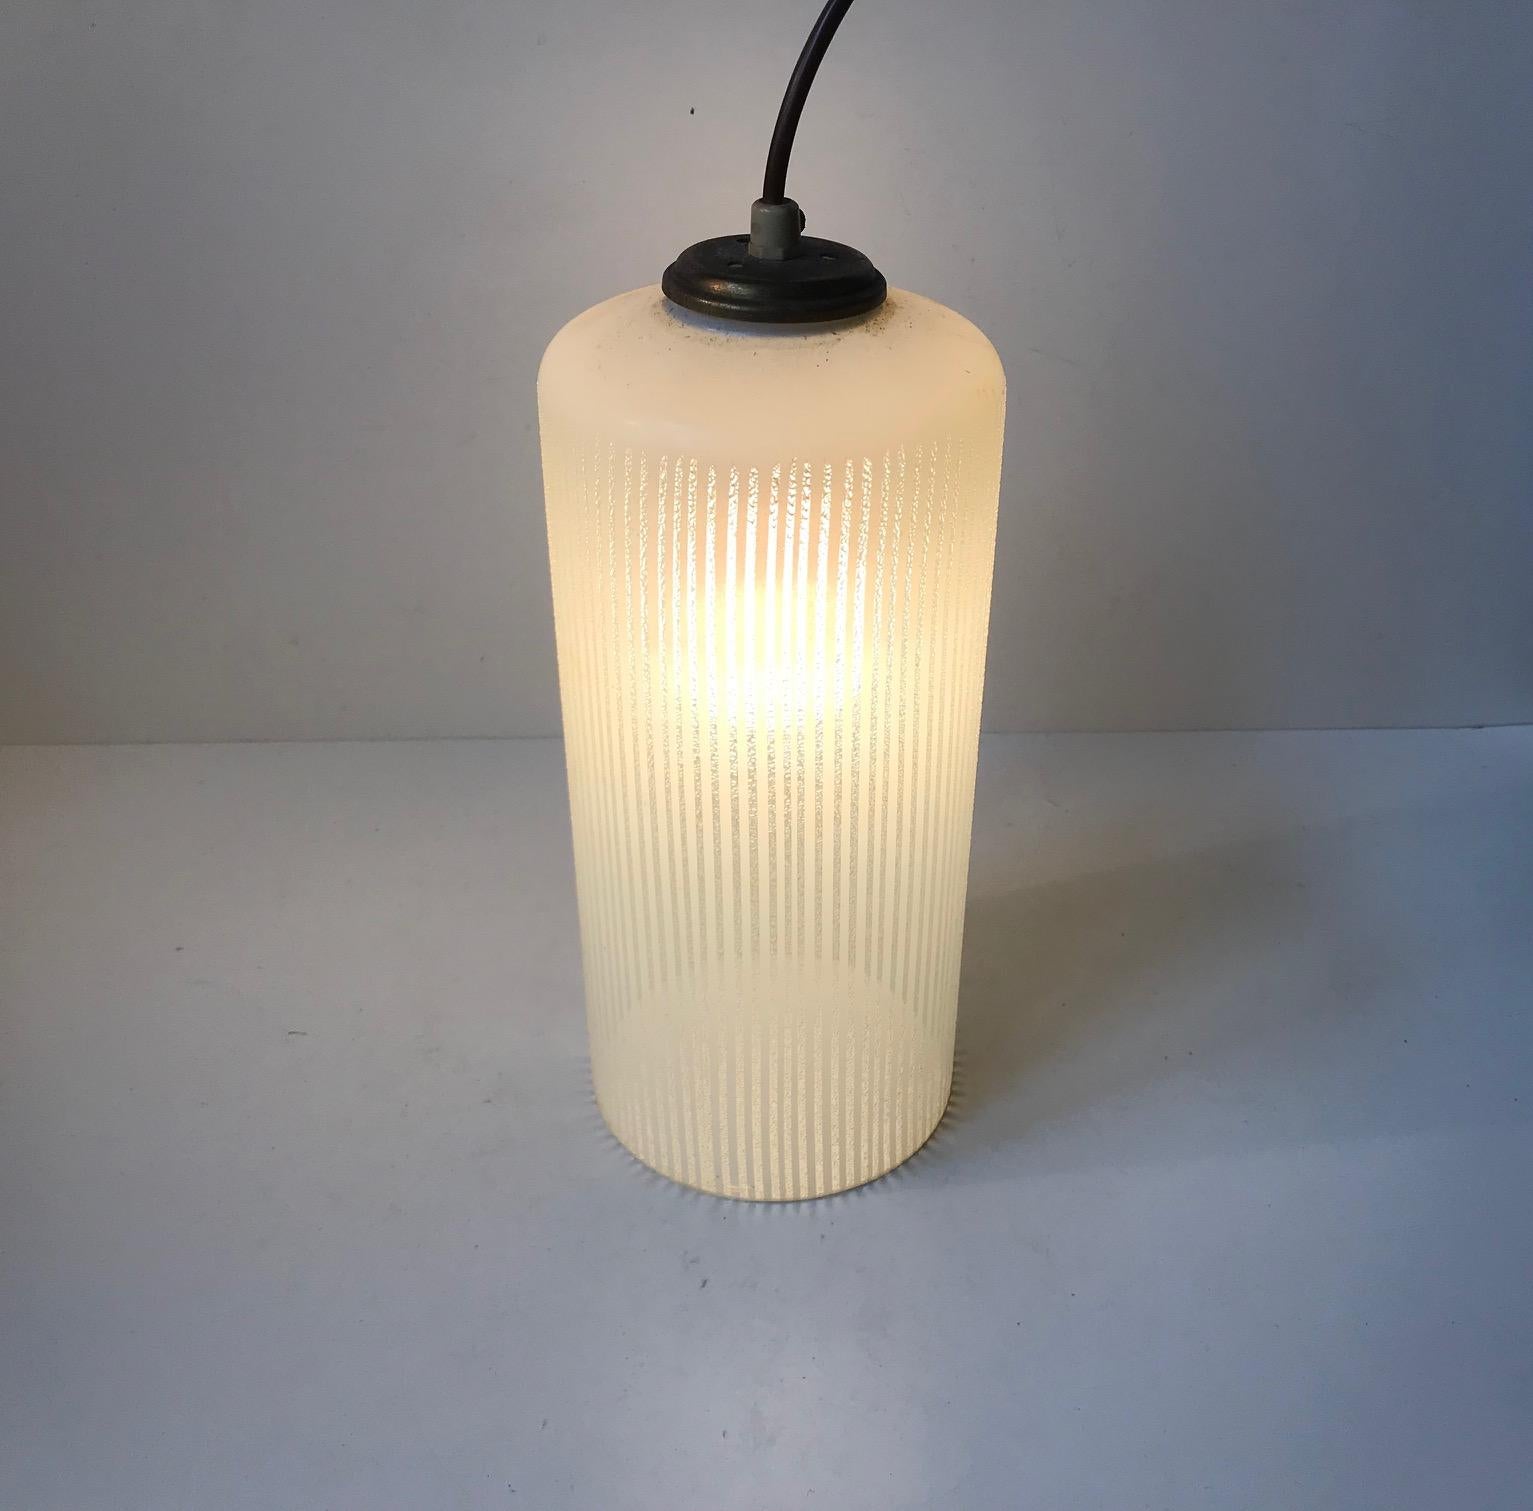 Vintage Danish Functionalist Pendant Light in Pinstriped Glass from Voss, 1950s 1